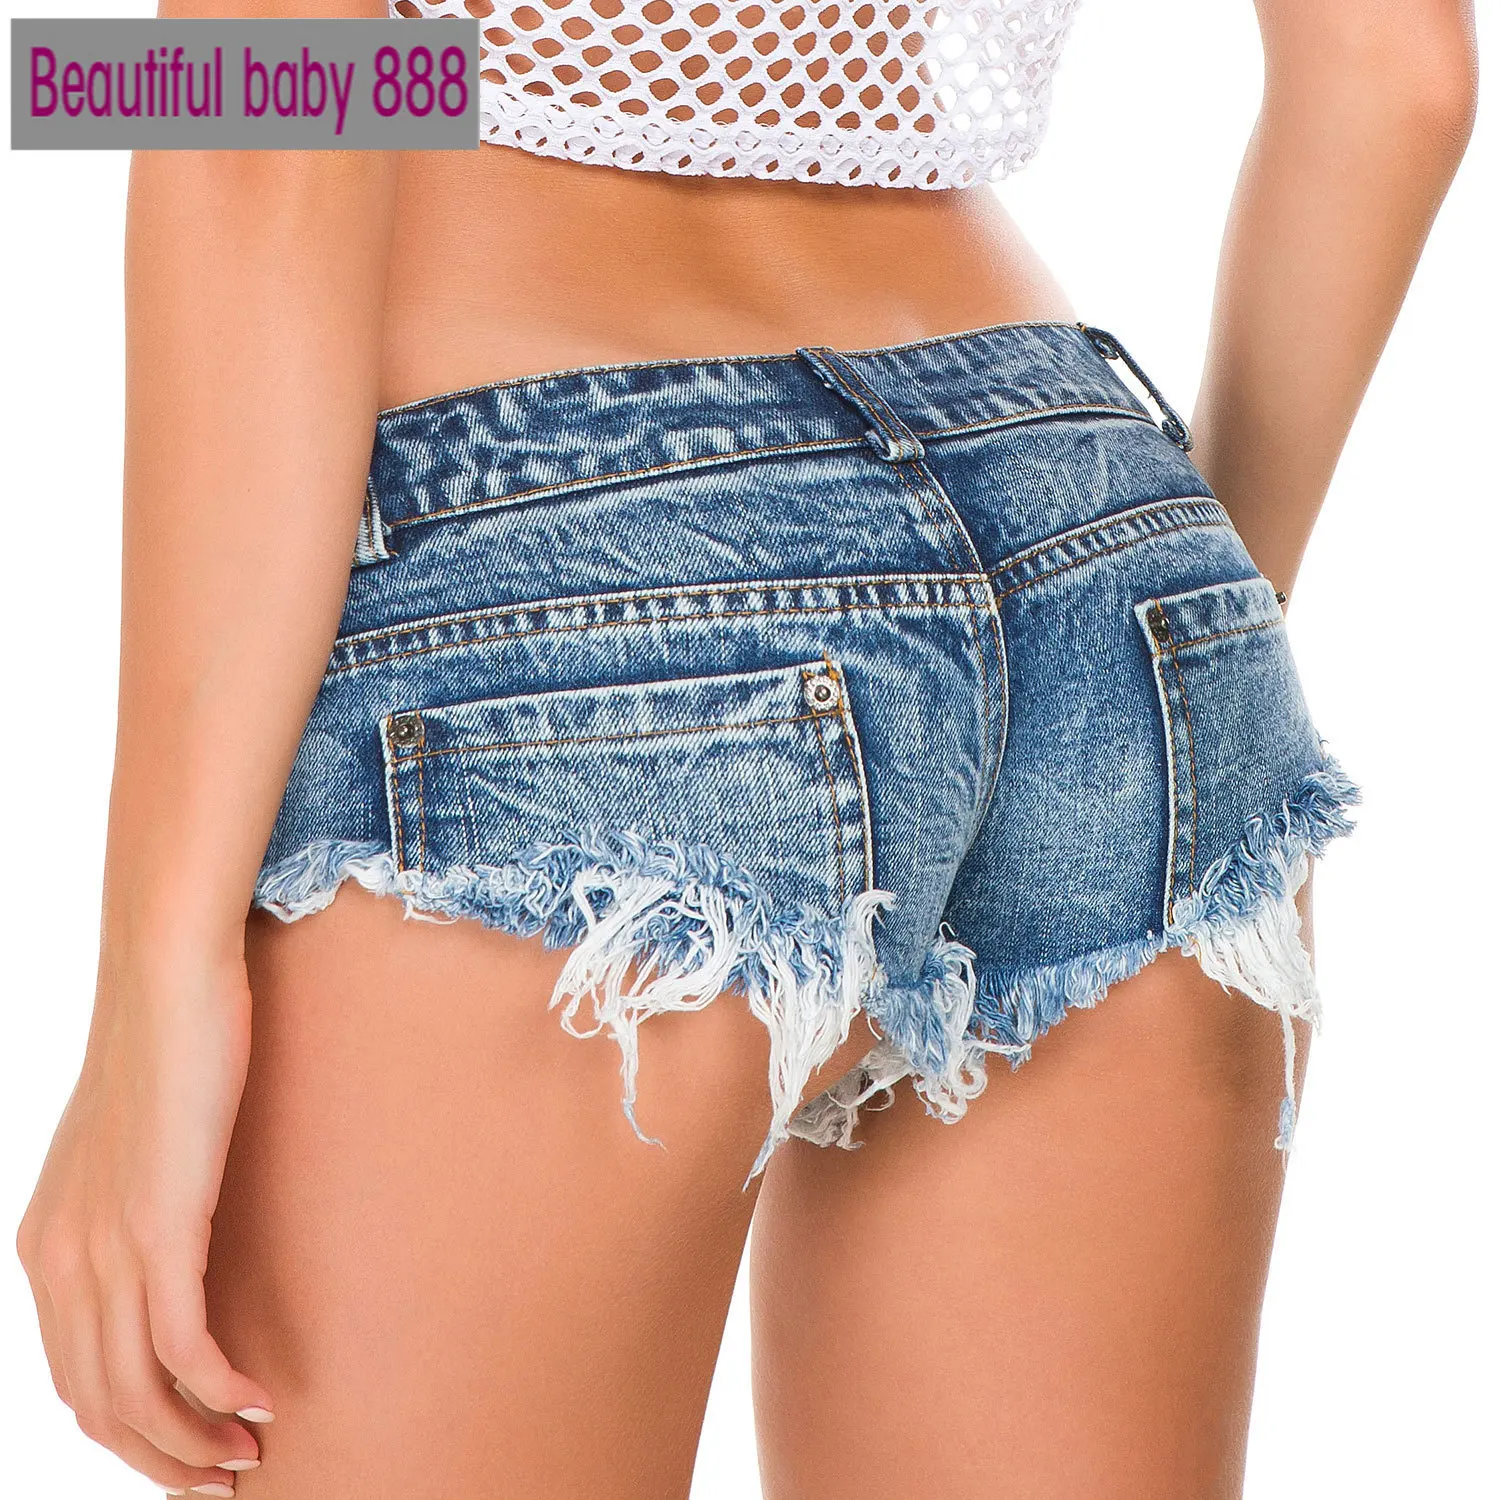 

Meqeiss New Fashion Summer Sexy Shorts Women Jeans Mini Denim Booty Shorts Casual Ladies Club Party Super Short Skinny Shors